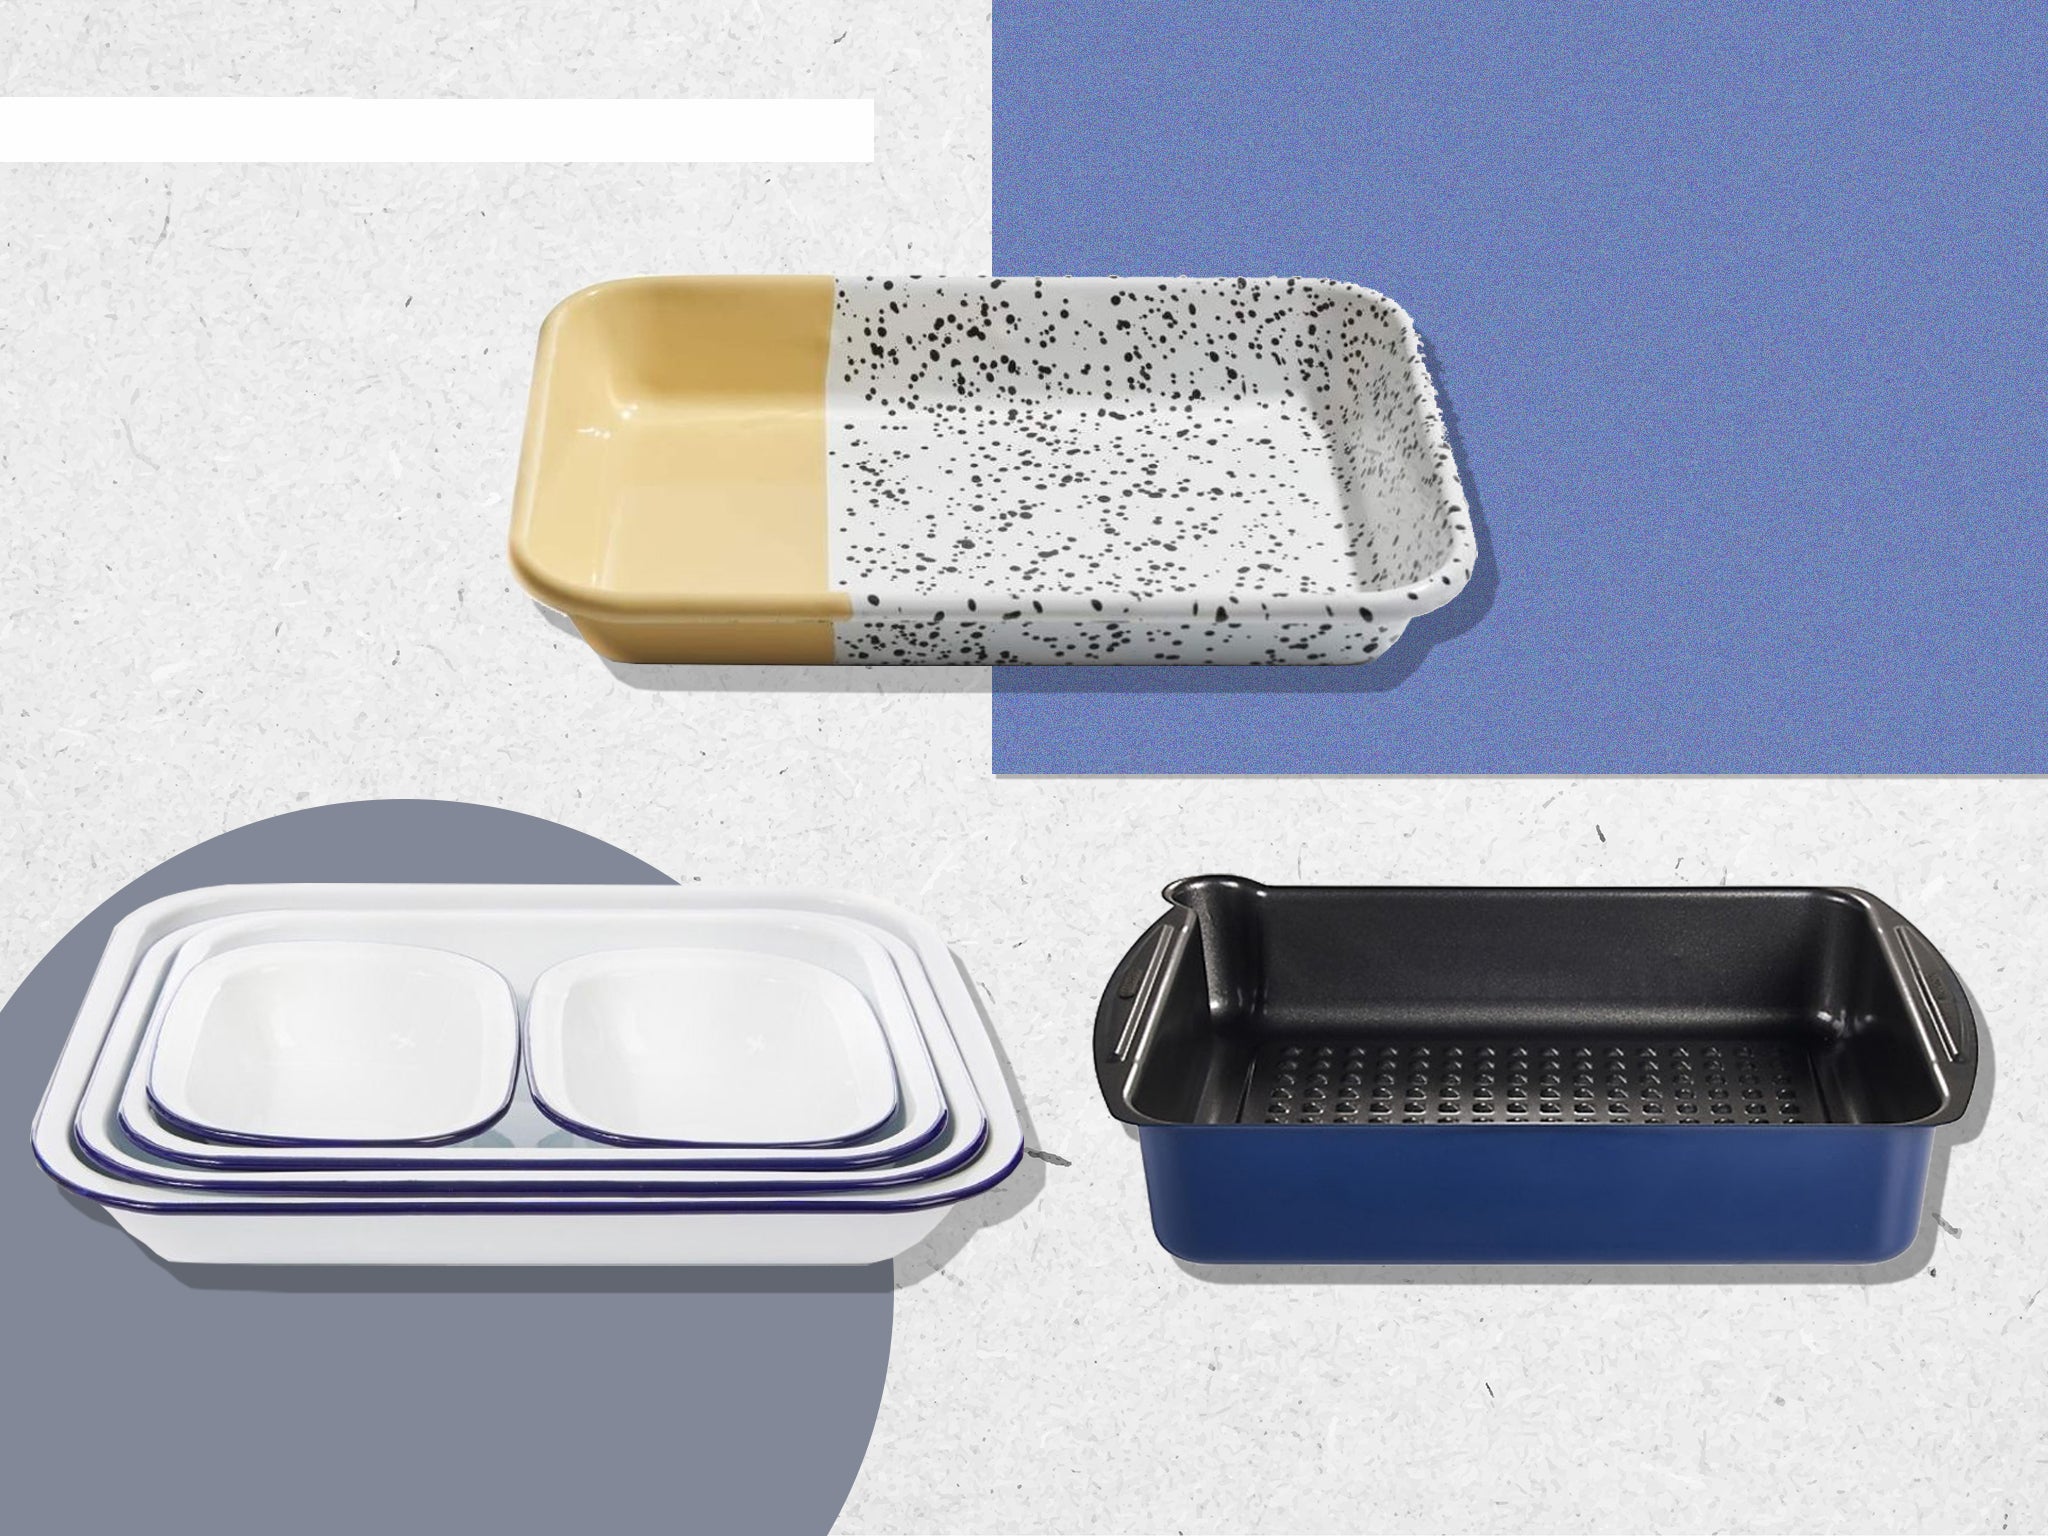 7 Best Baking Pans of 2021 to Pretty Up Your Table